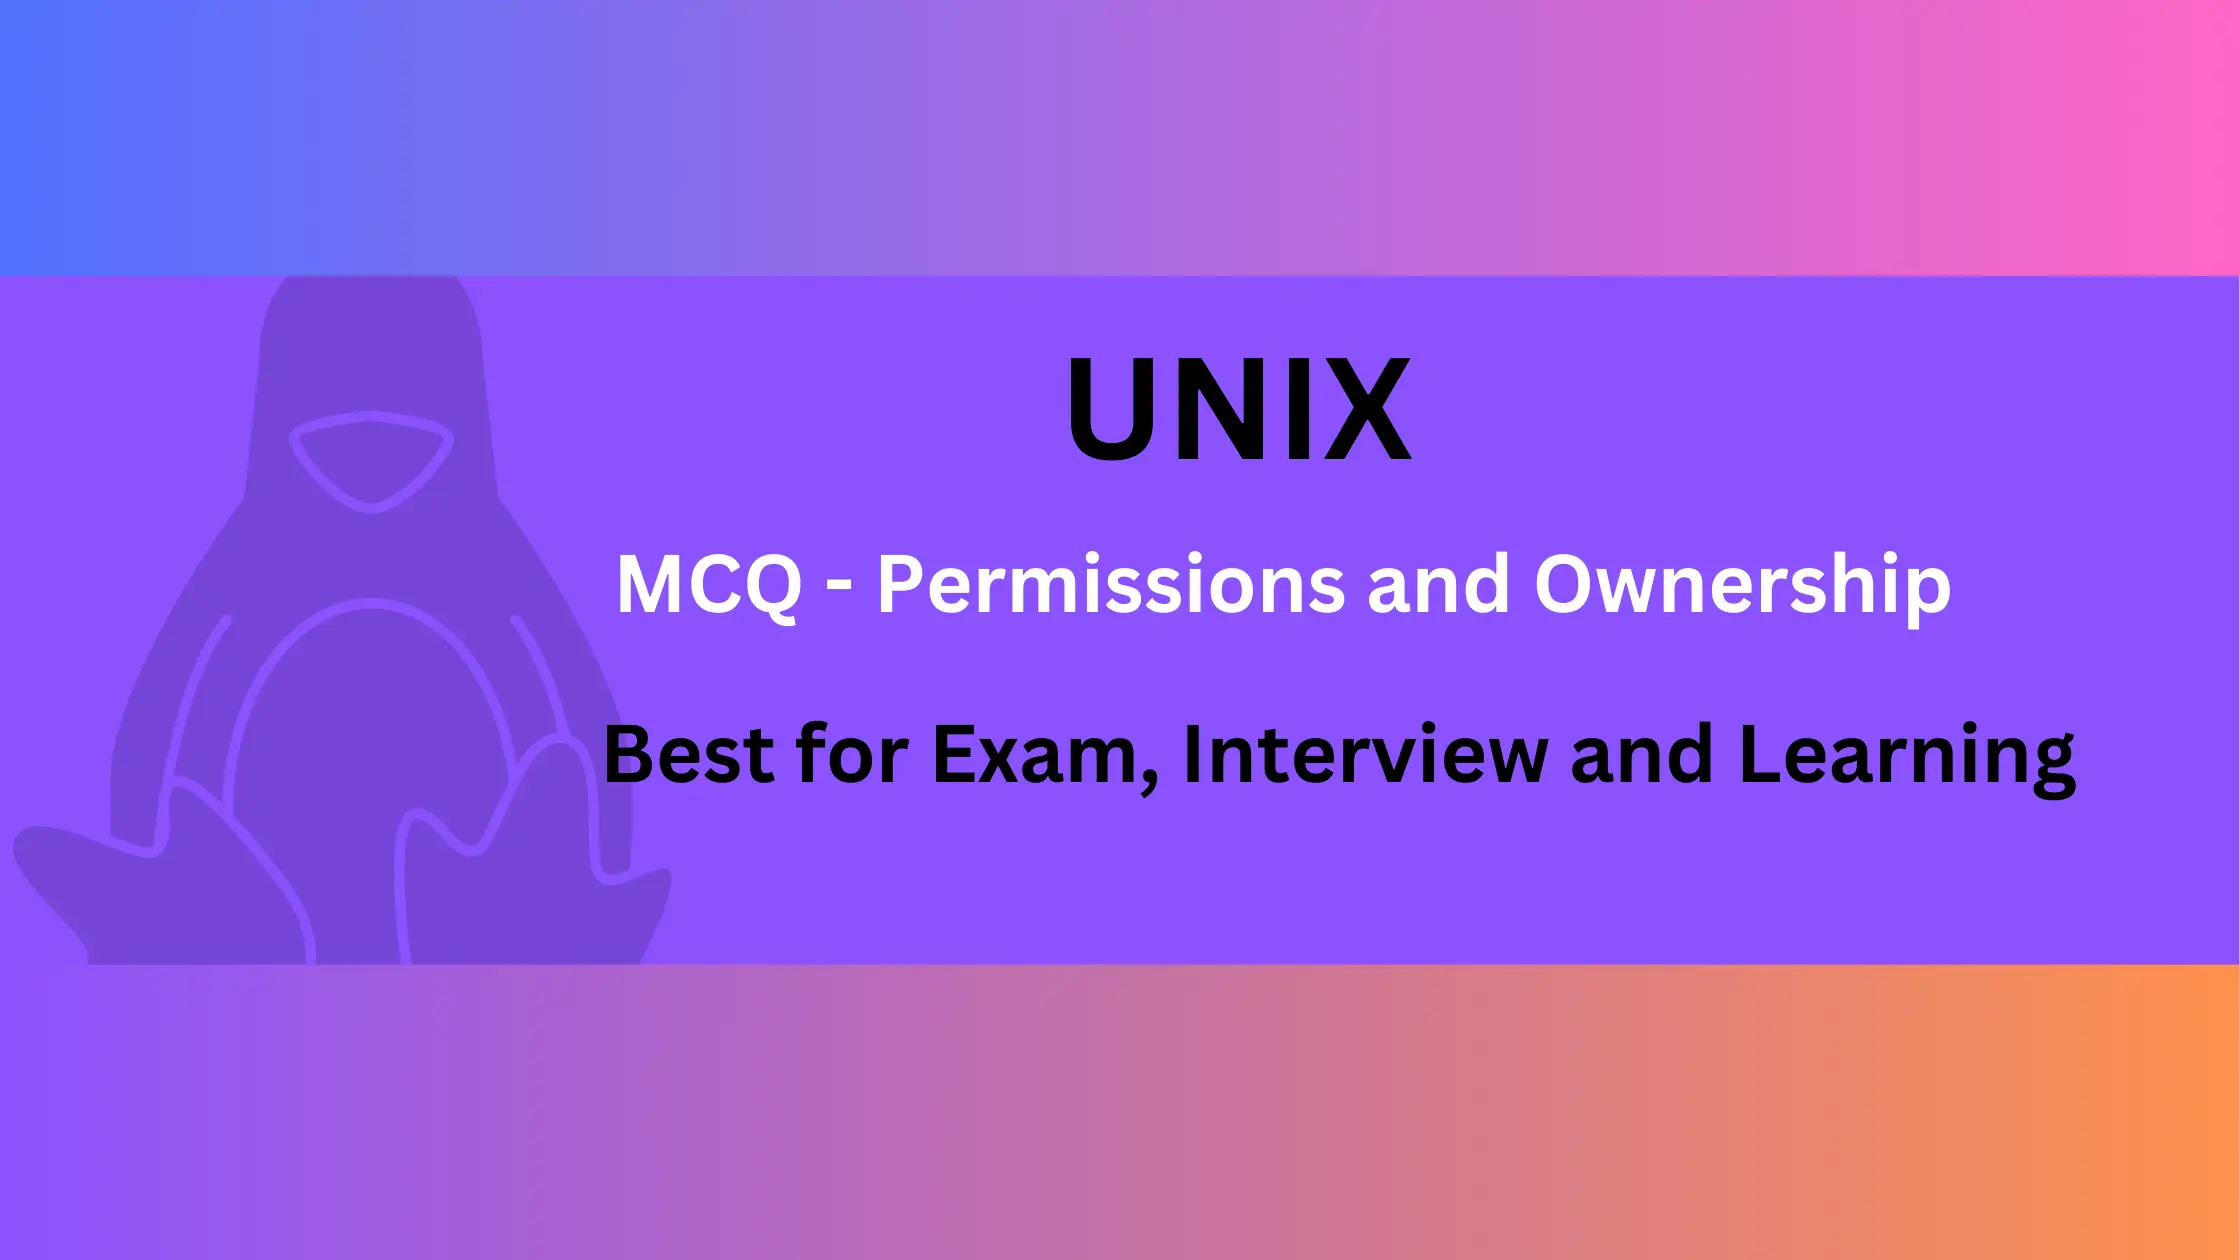 UNIX MCQ questions and answers on Permissions and Ownership